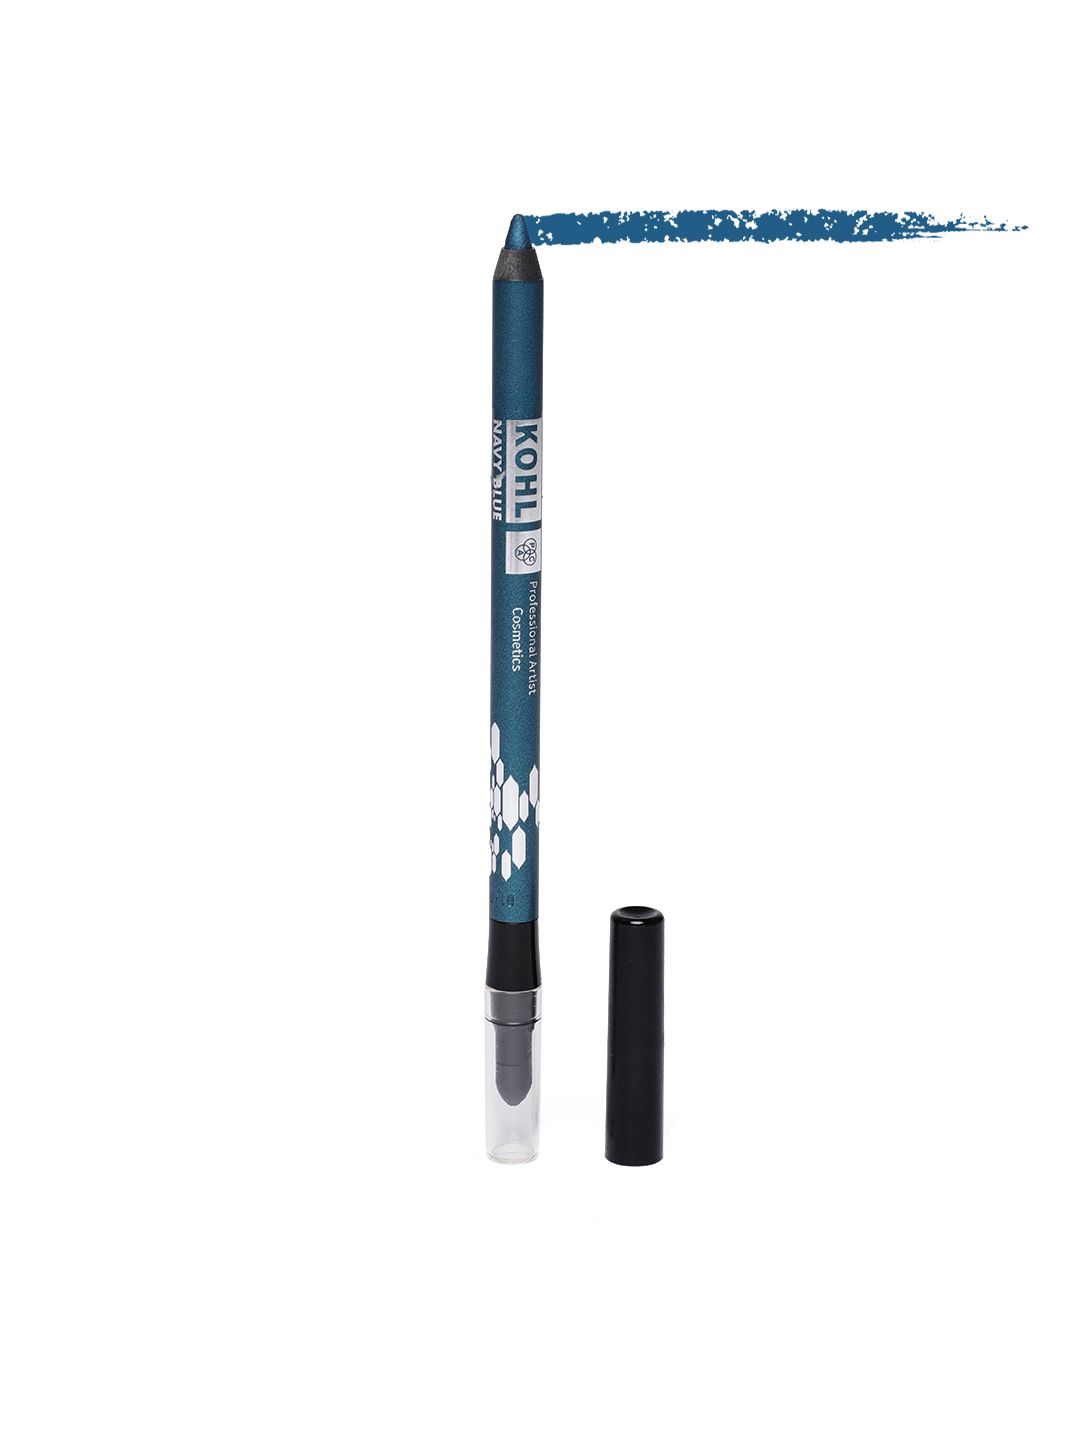 PAC Forest Navy Blue Longlasting Kohl Pencil 1.2 g Price in India